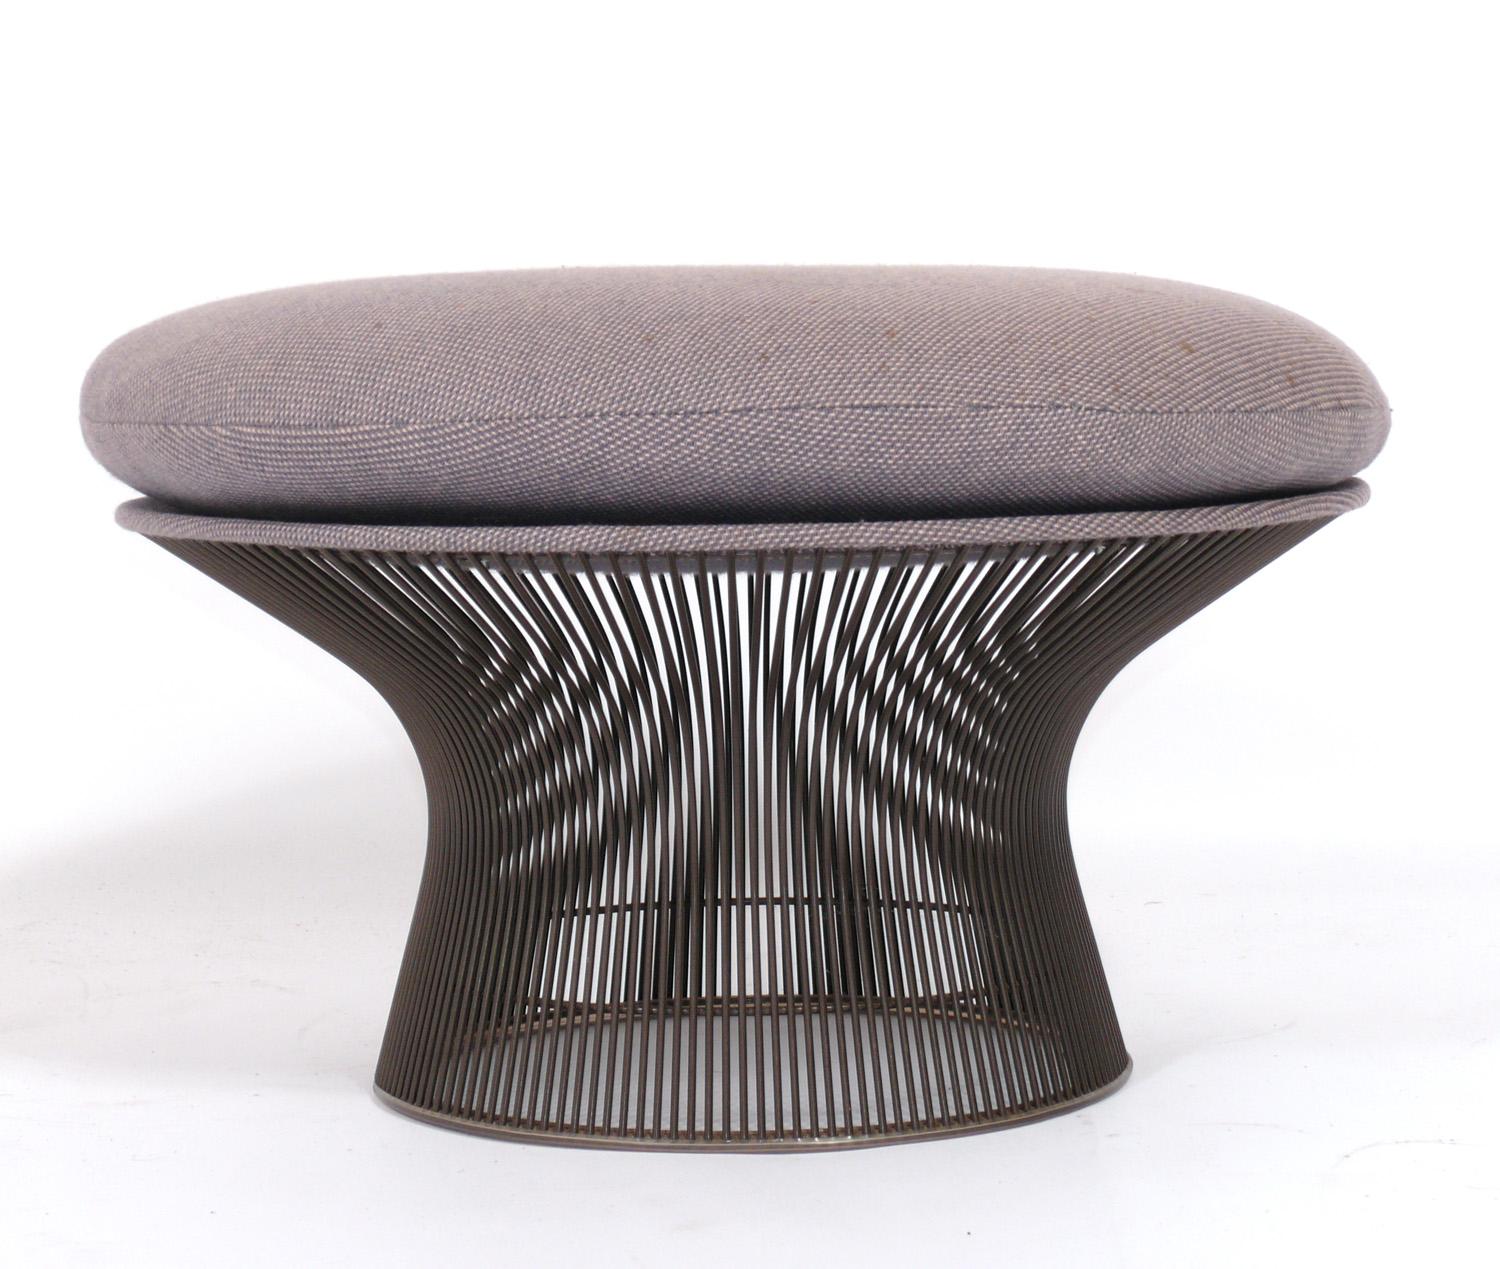 Sculptural stool or ottoman in original bronze finish, designed by Warren Platner for Knoll, American, circa 1960s. Signed with Knoll tag. This stool is currently being reupholstered and can be completed in your fabric. Simply send us 3 yards of